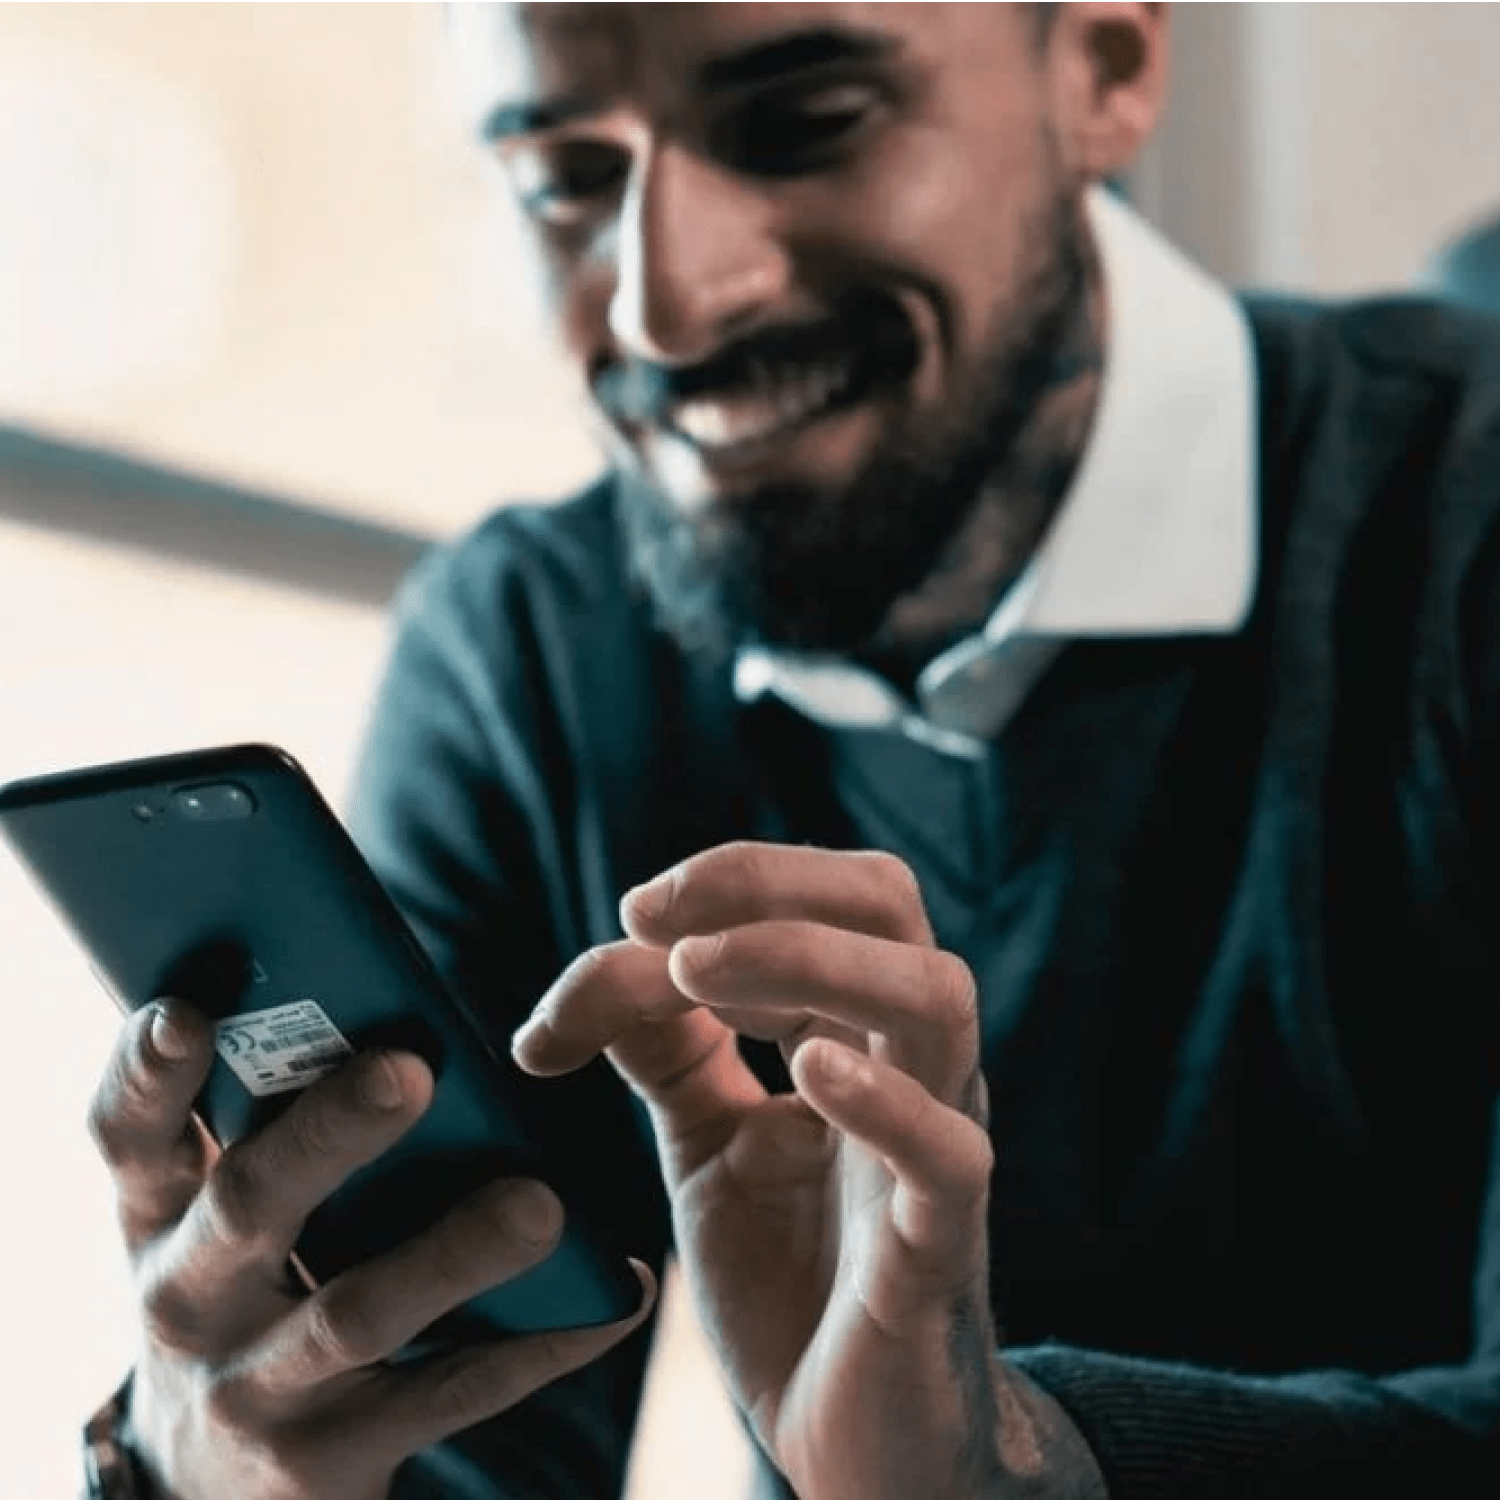 Man looking at his phone while smiling